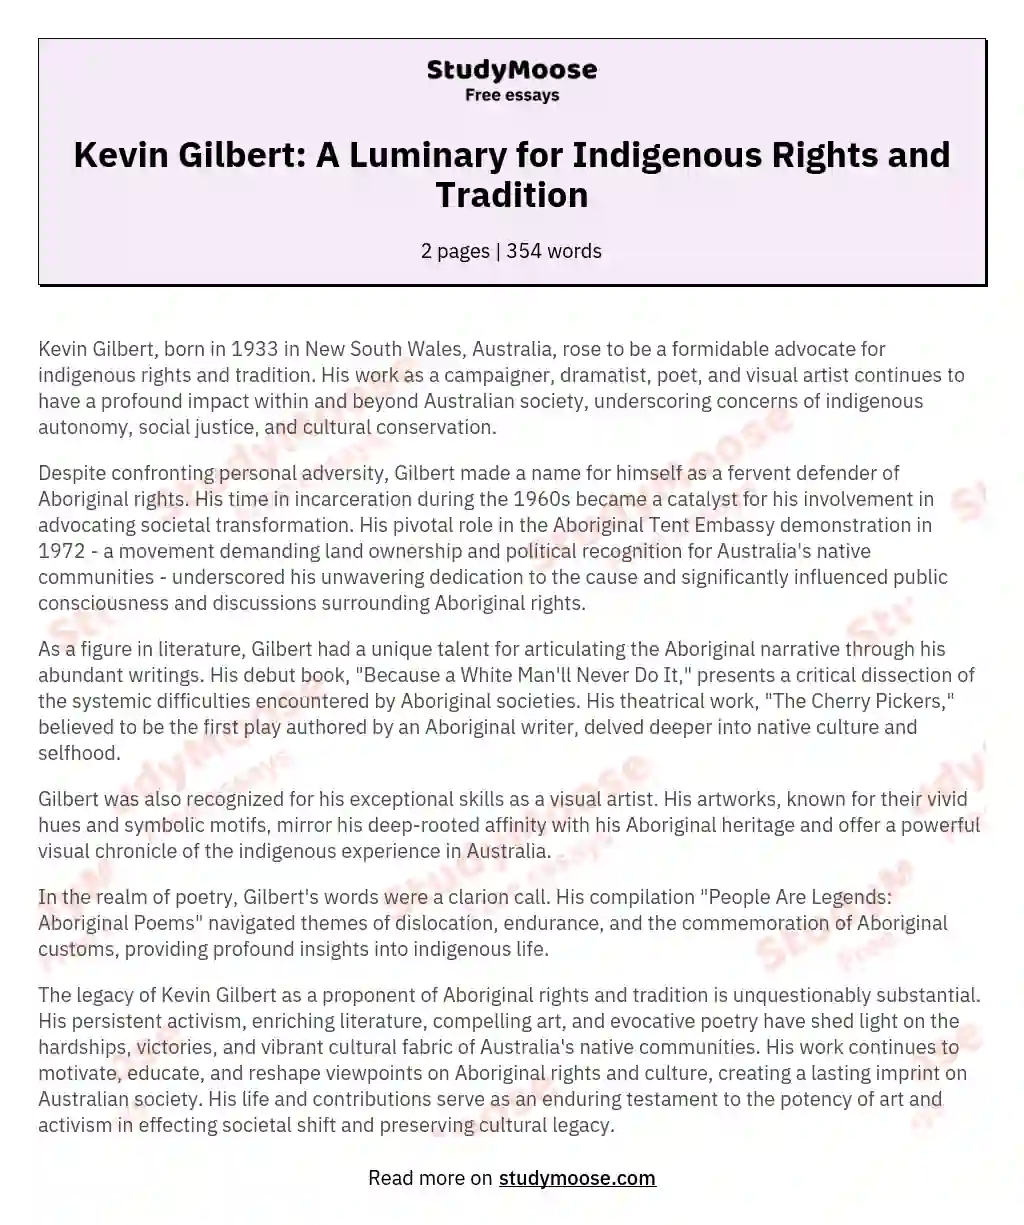 Kevin Gilbert: A Luminary for Indigenous Rights and Tradition essay